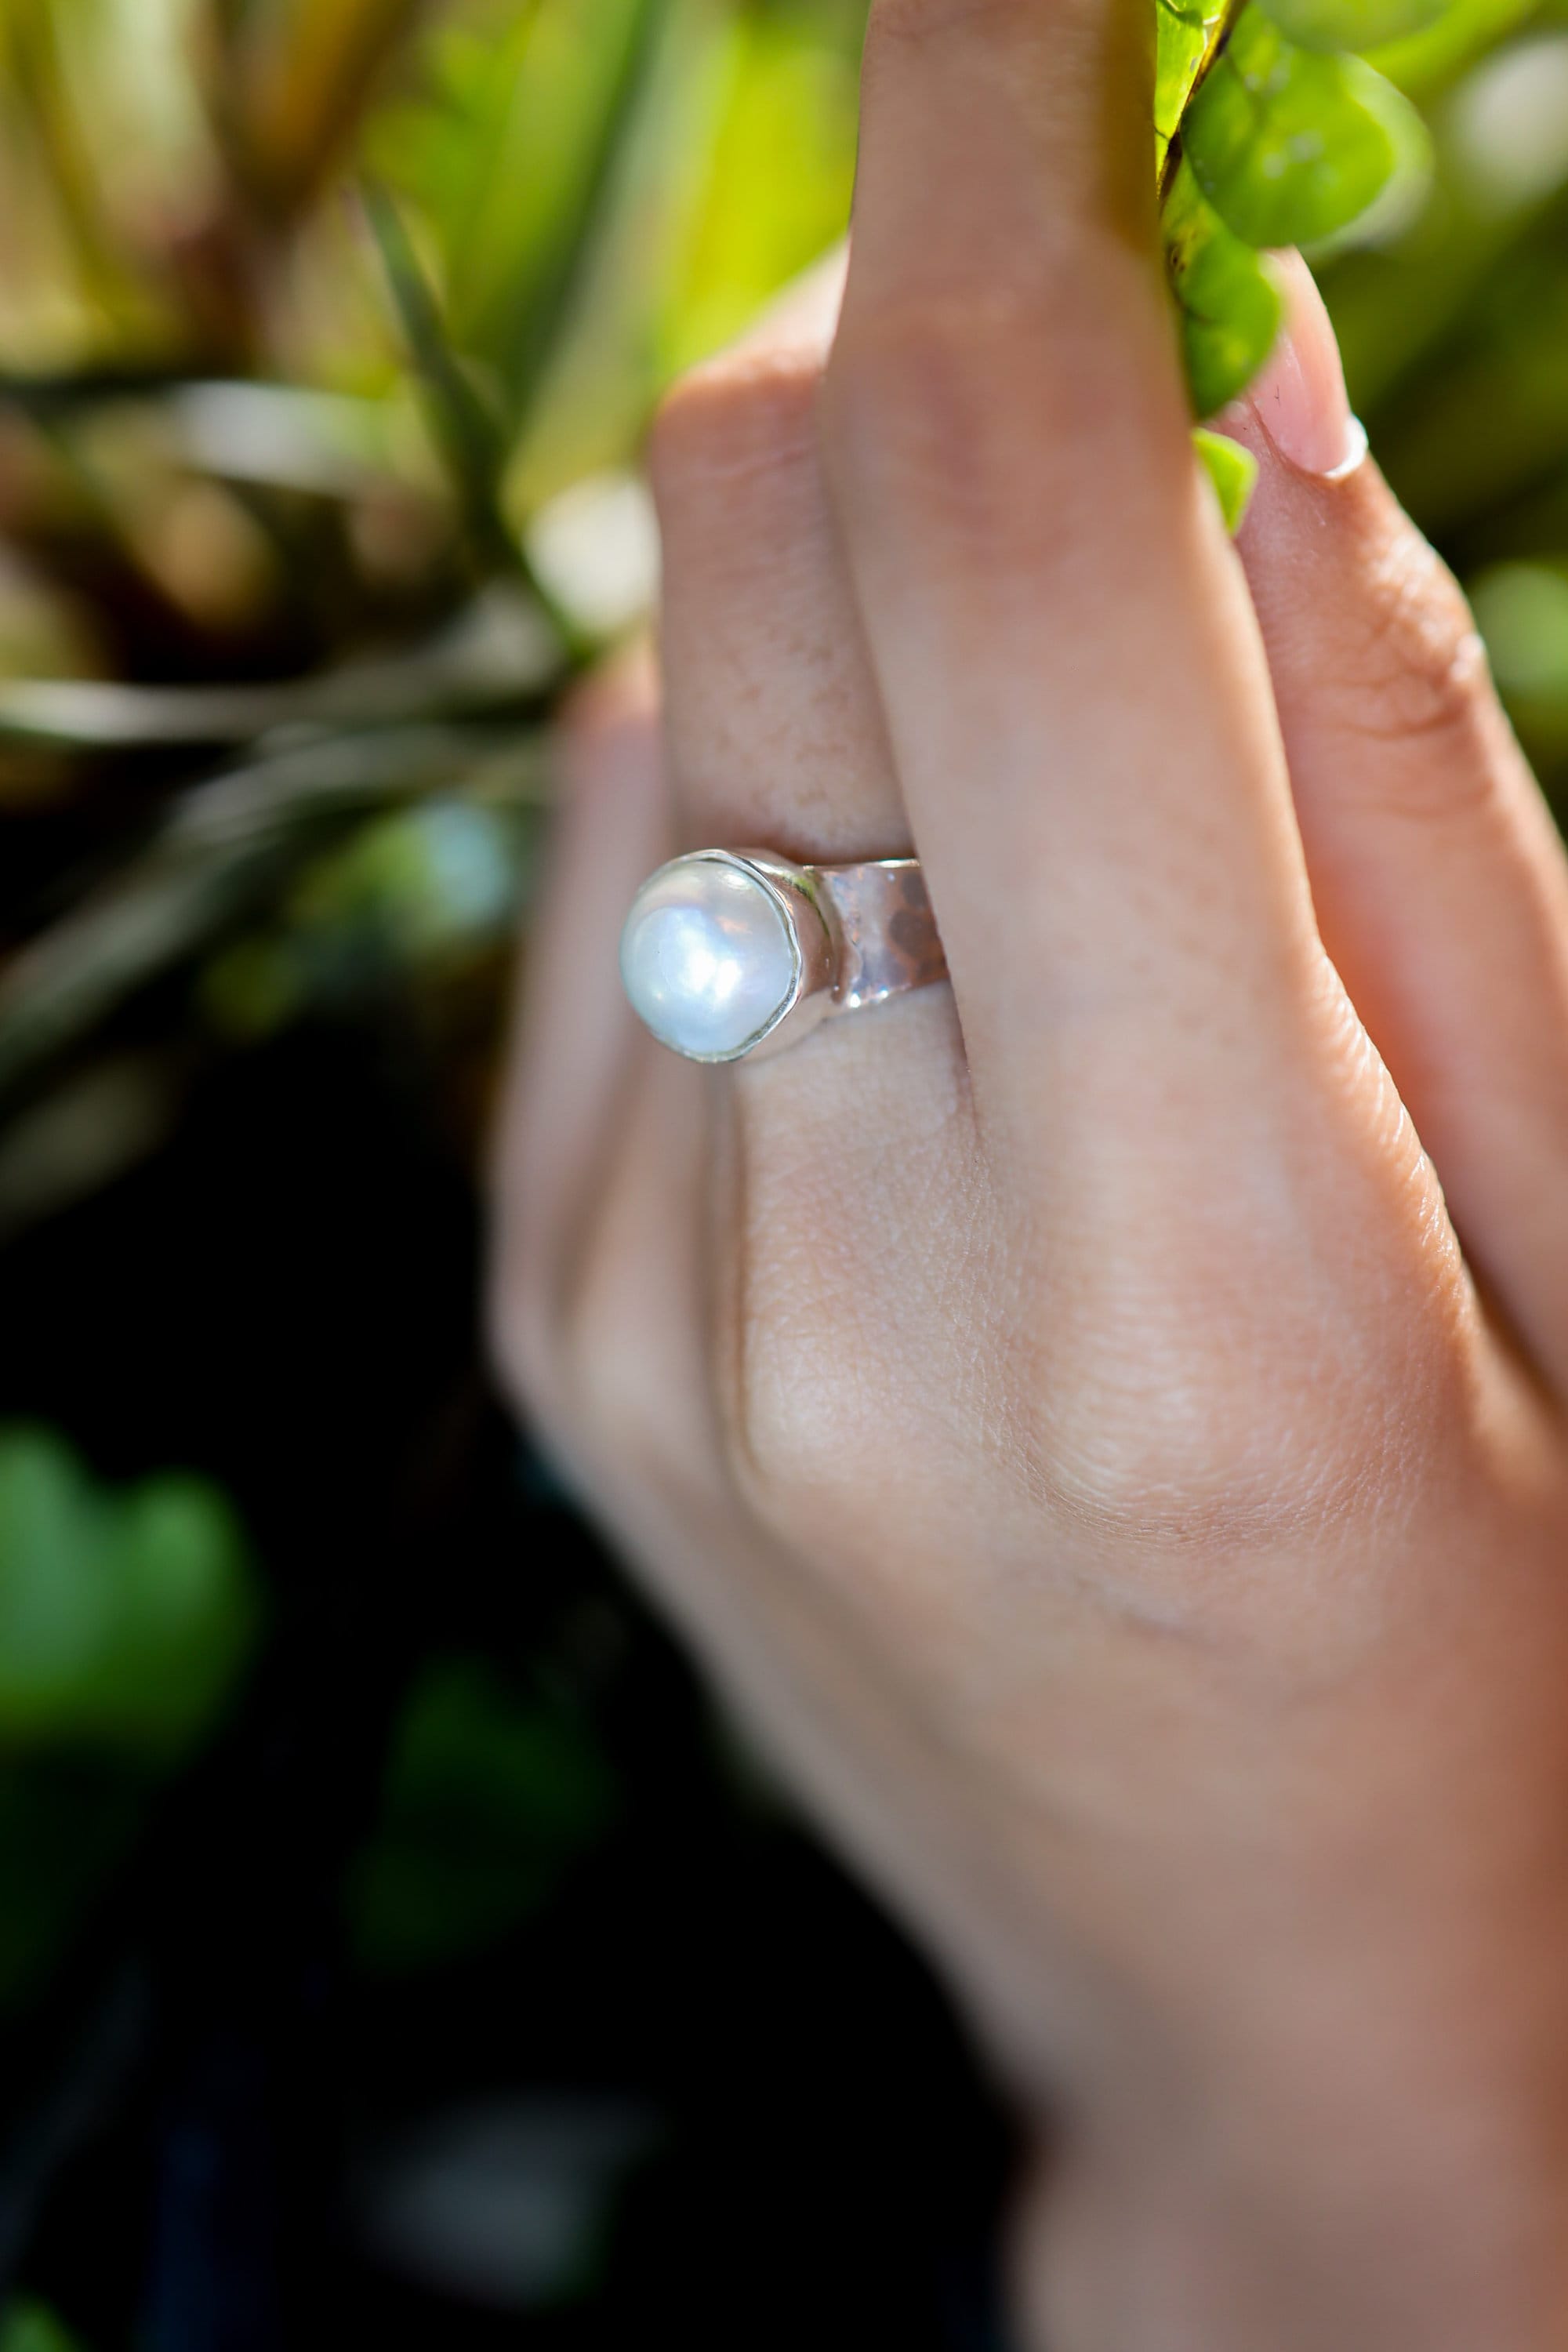 Large South Sea Pearl Ring - Hammered Band - 925 Sterling Silver Setting - Unisex - High Shine Polish - Enhances Calmness & Inner Wisdom